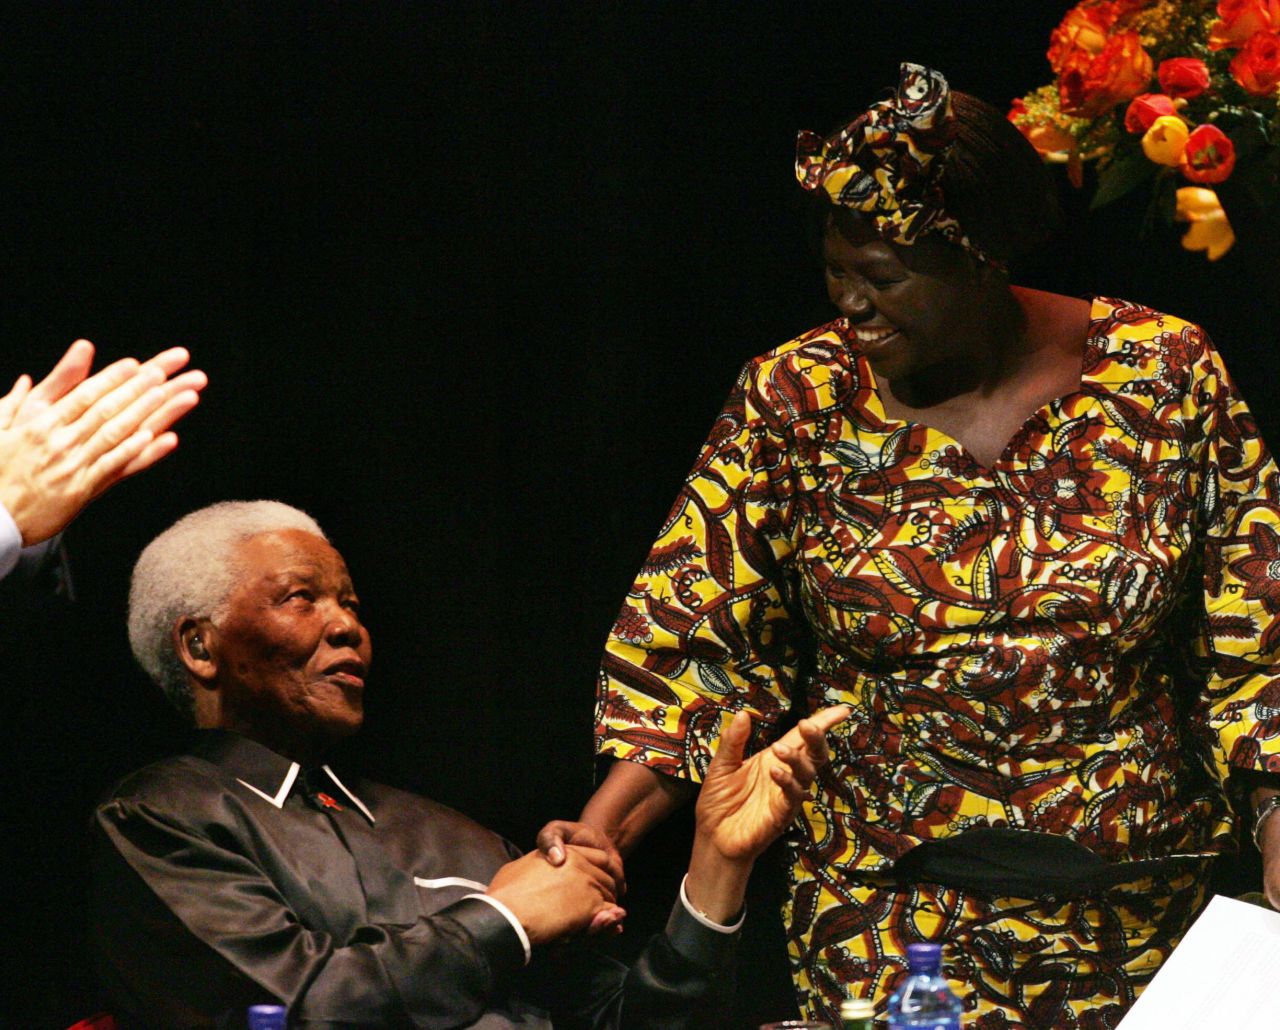 Wangari was the first African woman to win the Nobel prize but followed previous winners from the continent such as Nelson Mandela.